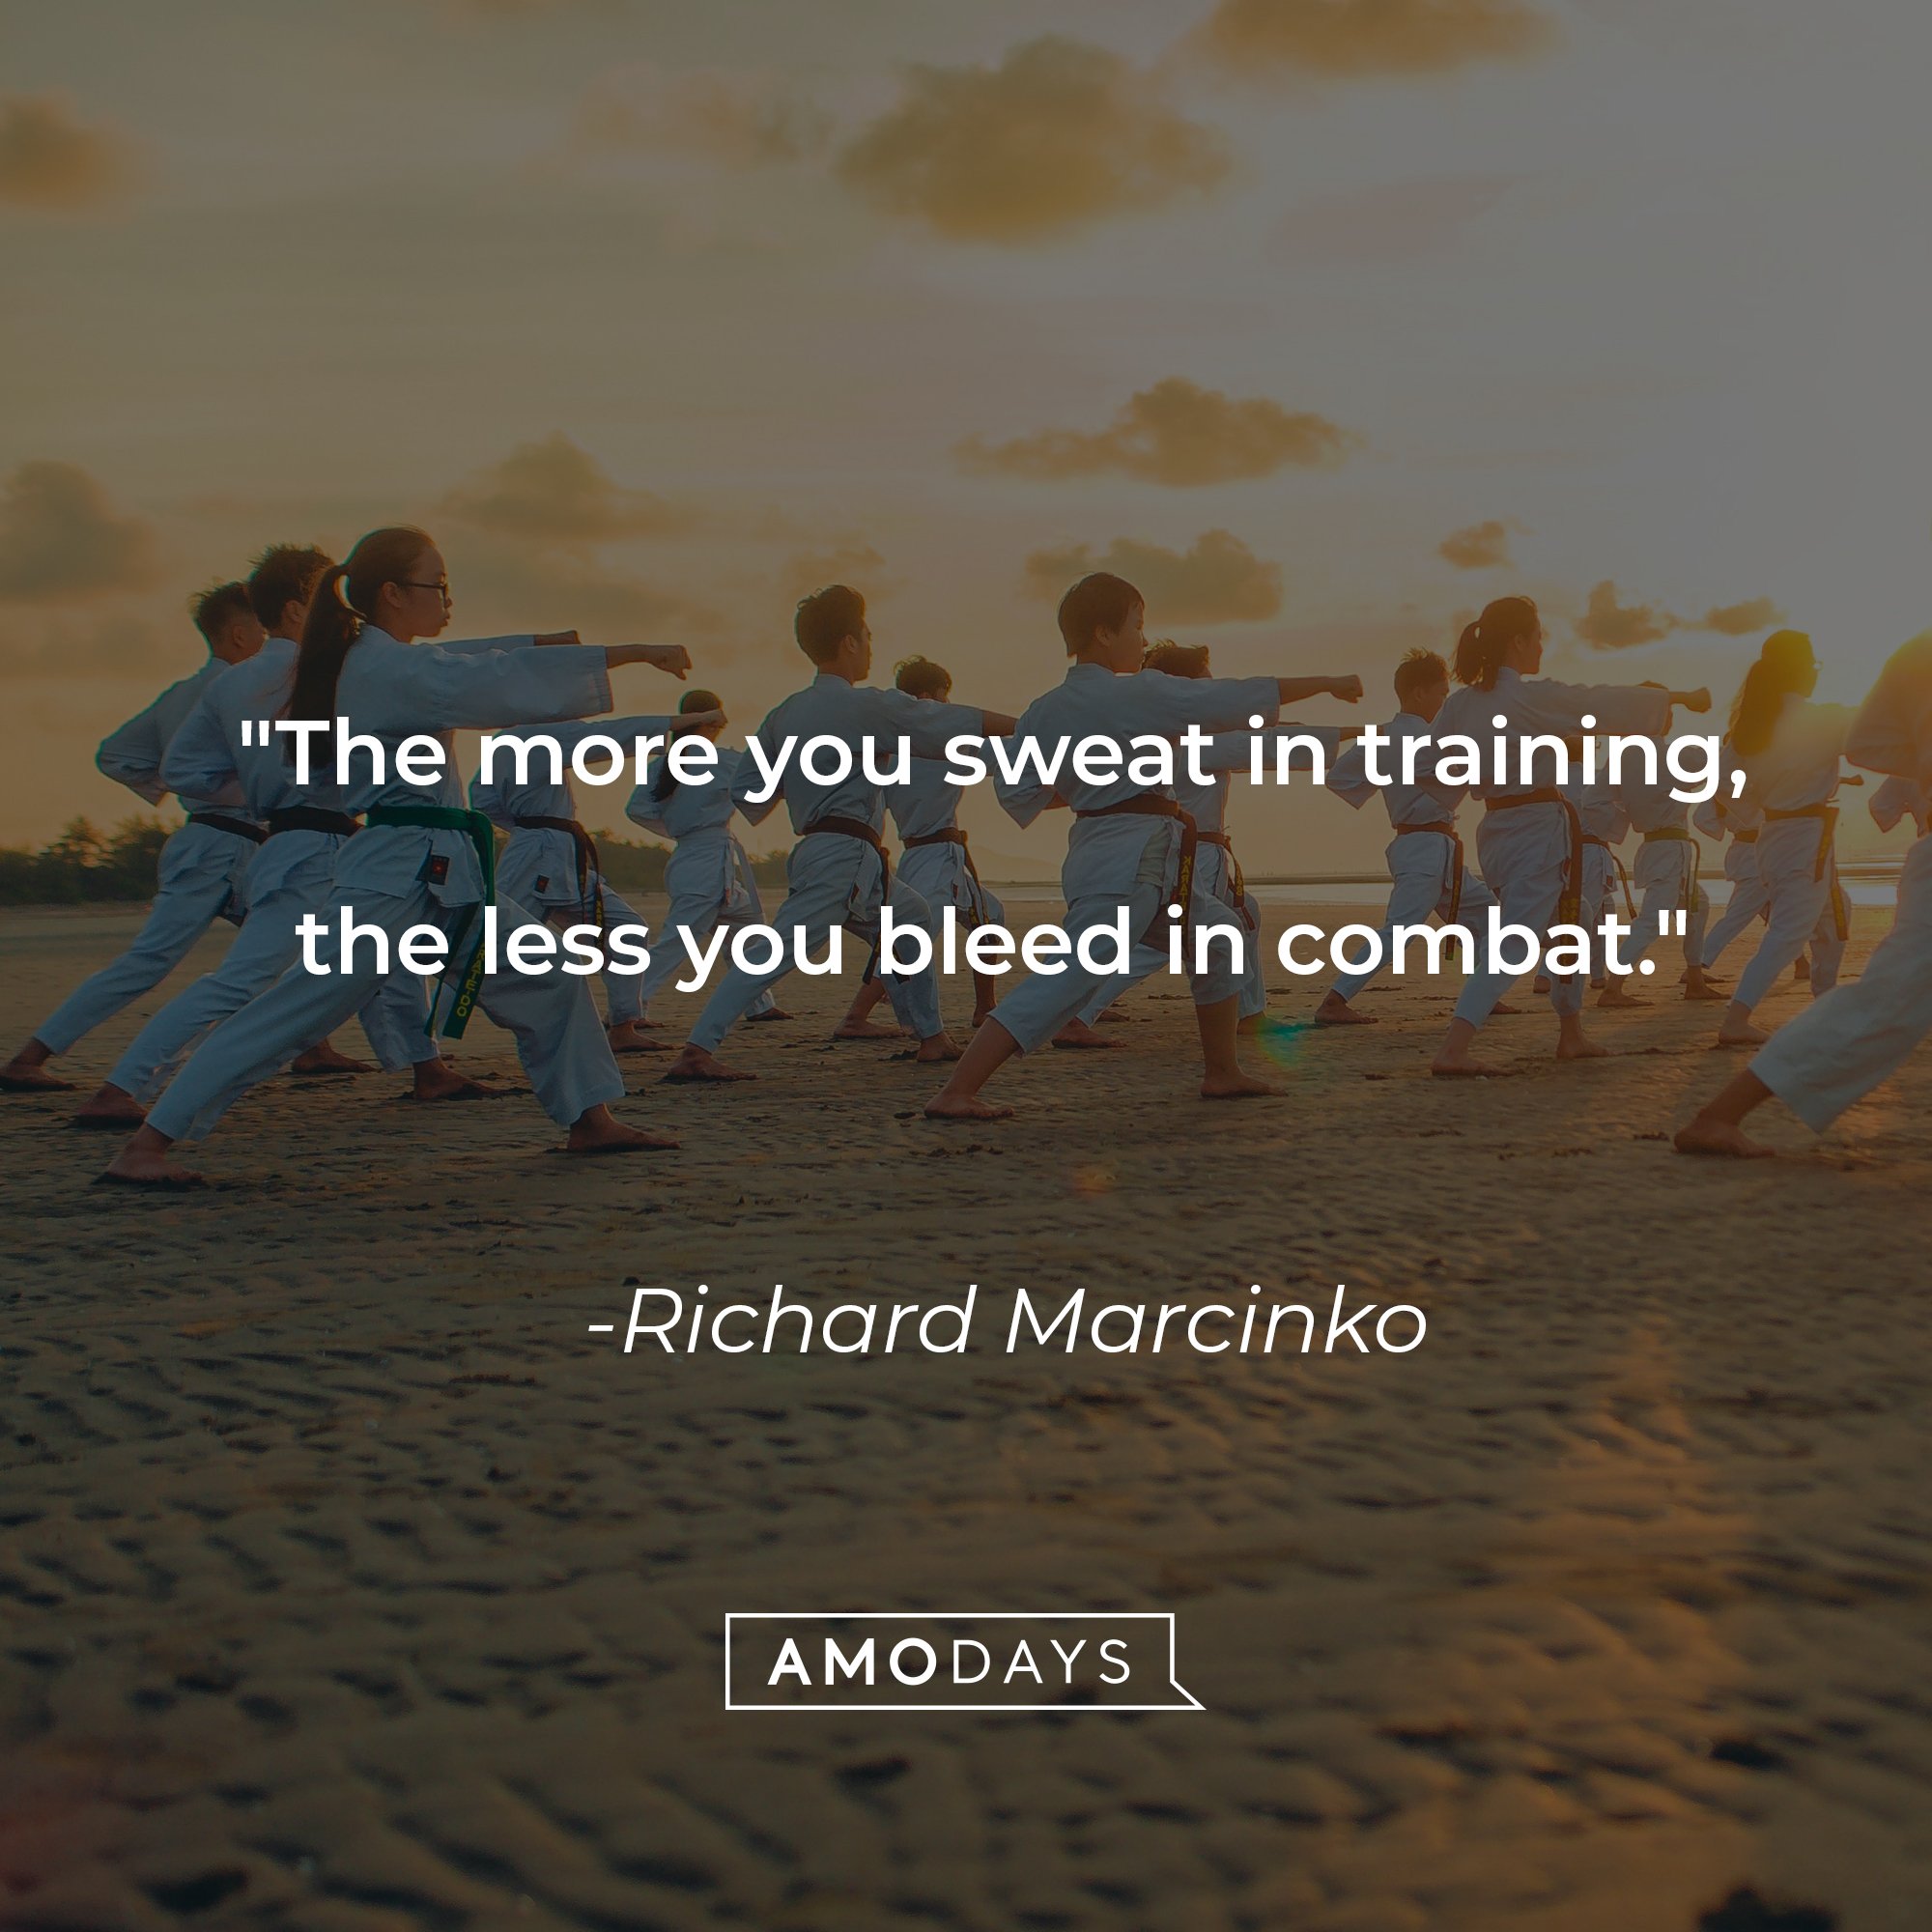 Richard Marcinko’s quote: "The more you sweat in training, the less you bleed in combat." | Image: AmoDays    